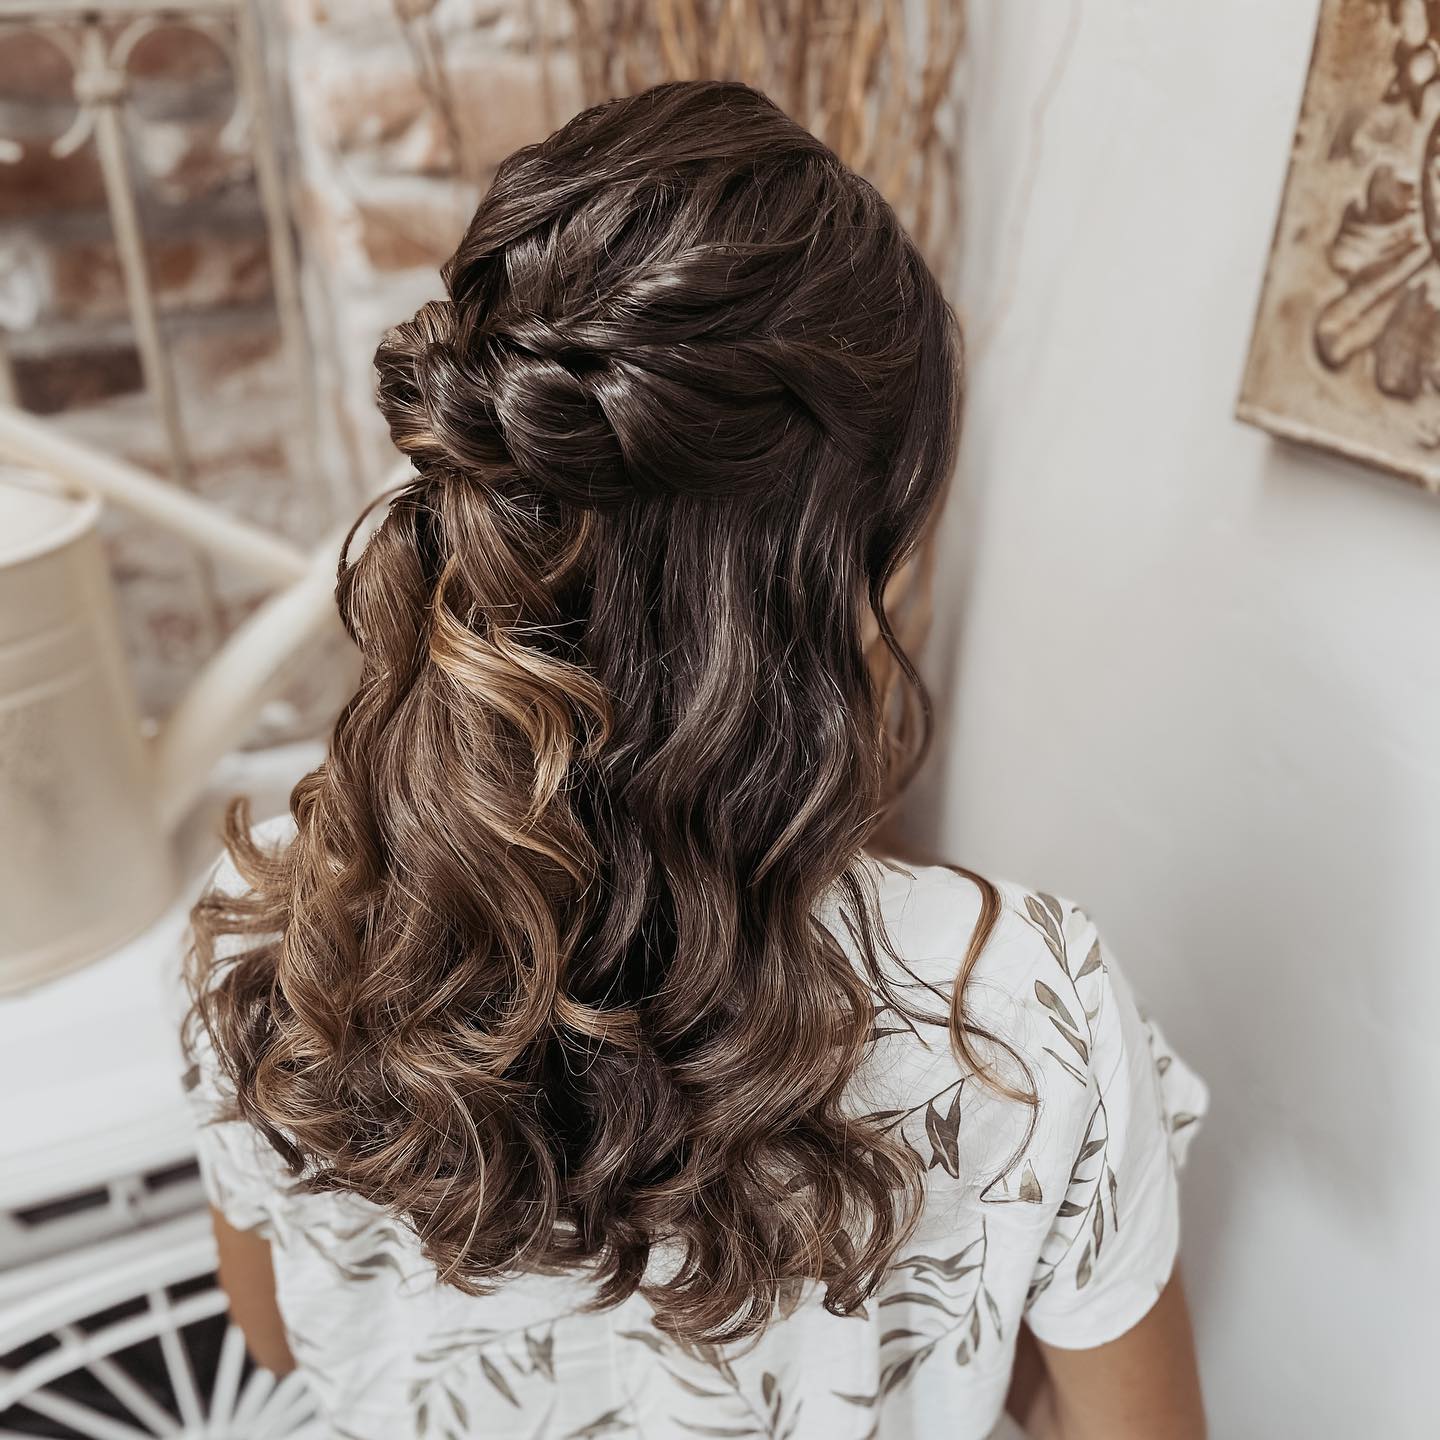 Easy hairstyles for you to try this Ganesh Chaturthi